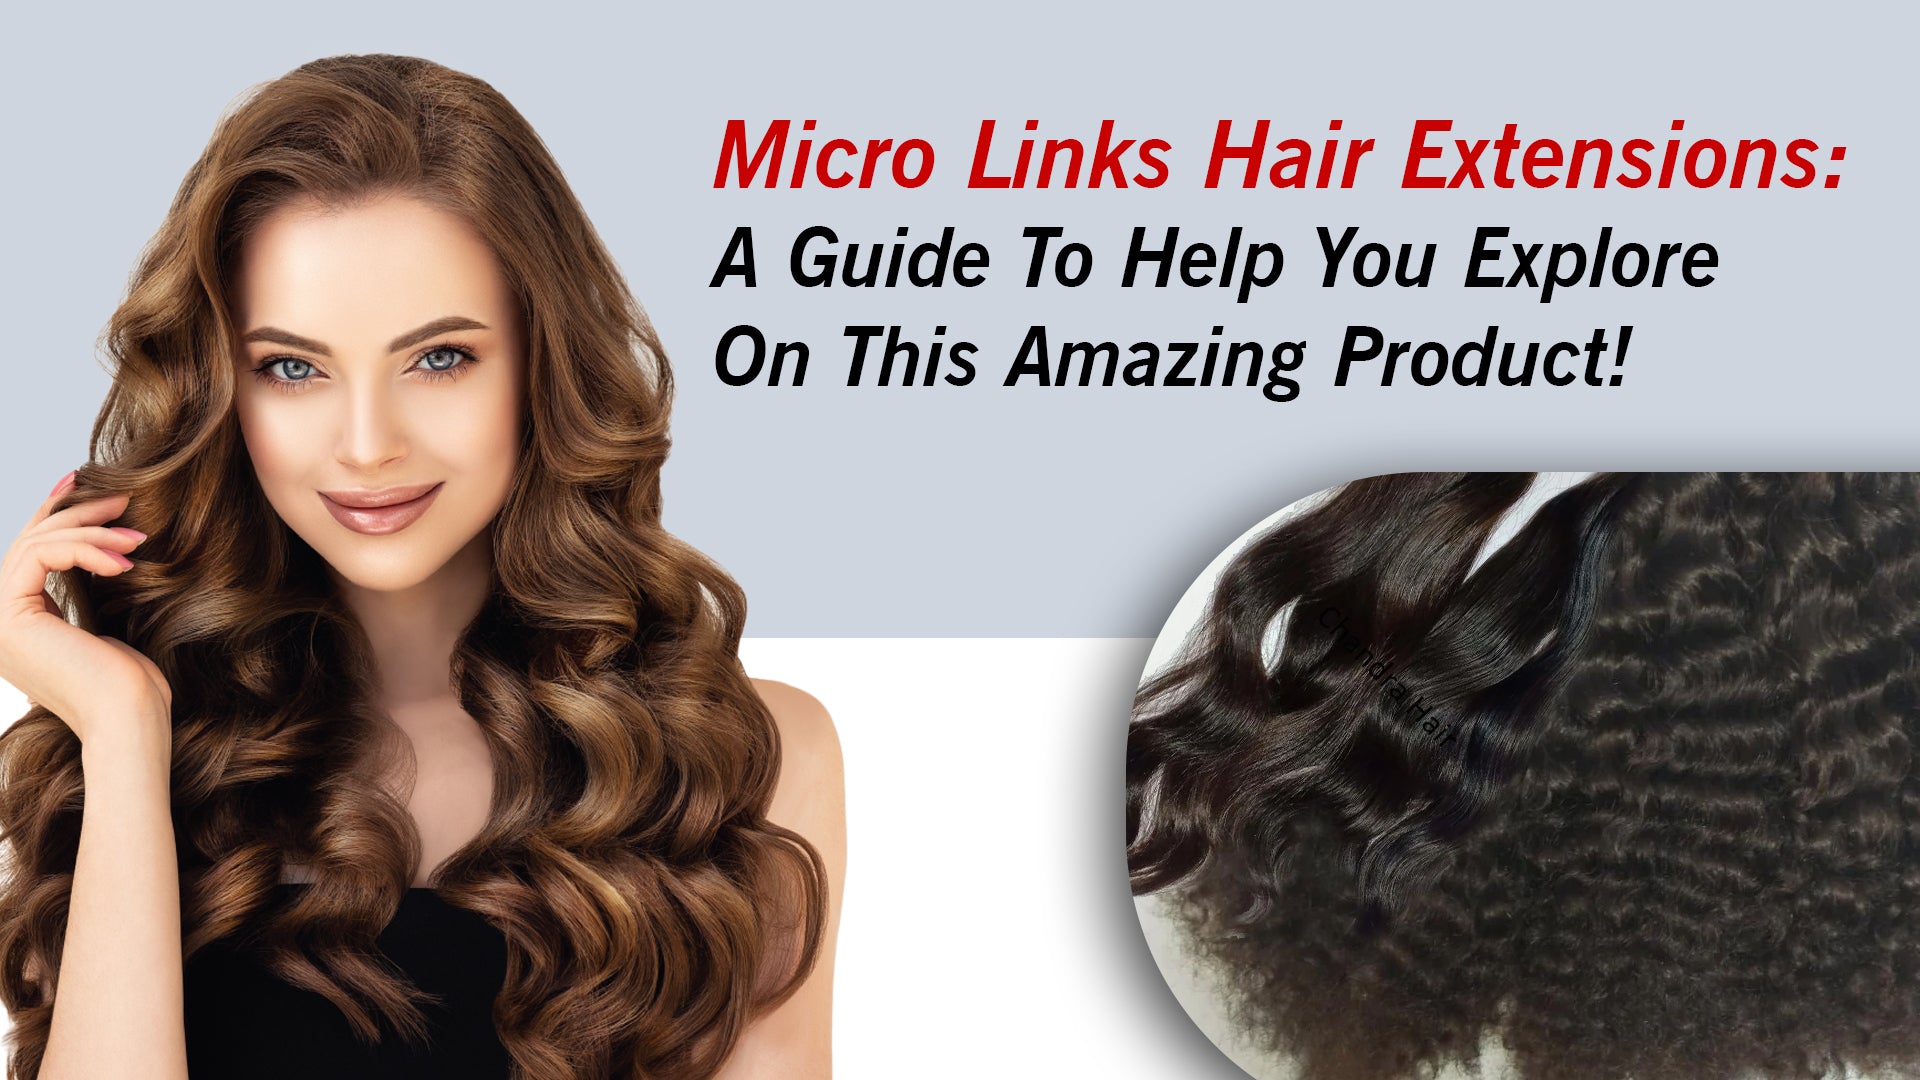 Micro Links Hair Extensions: A Guide To Help You Explore This